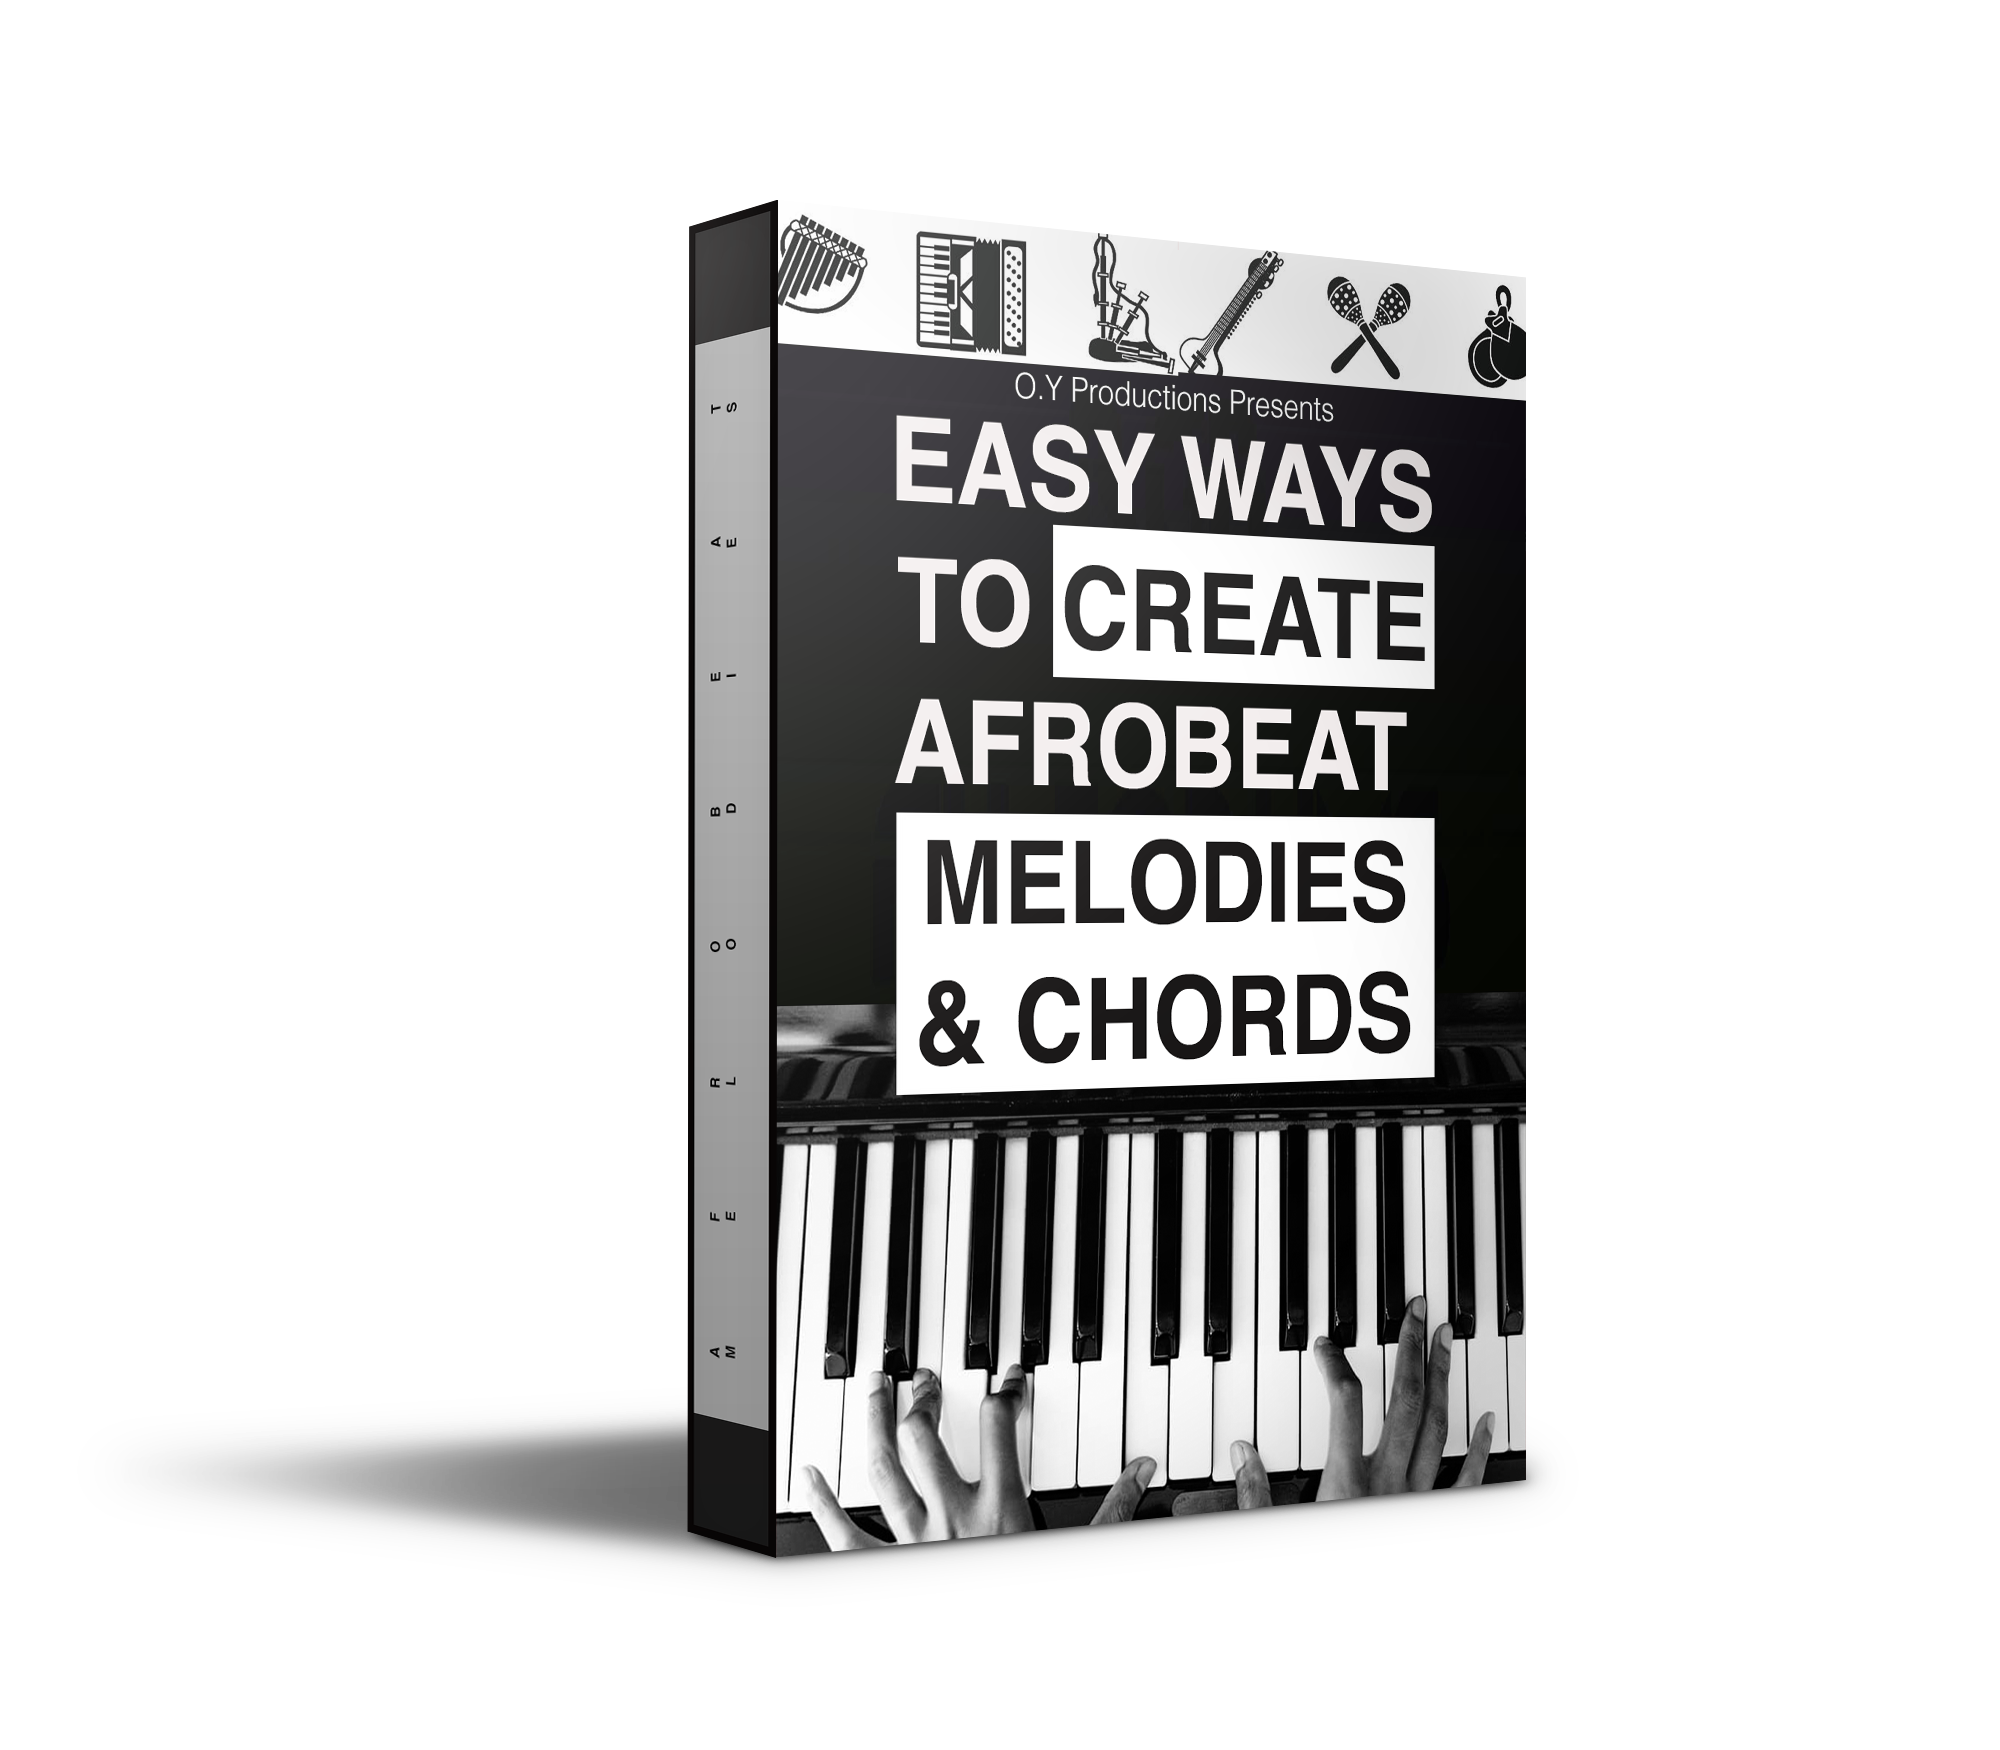 Easy Ways To Create Afrobeat Melodies and Chords Course